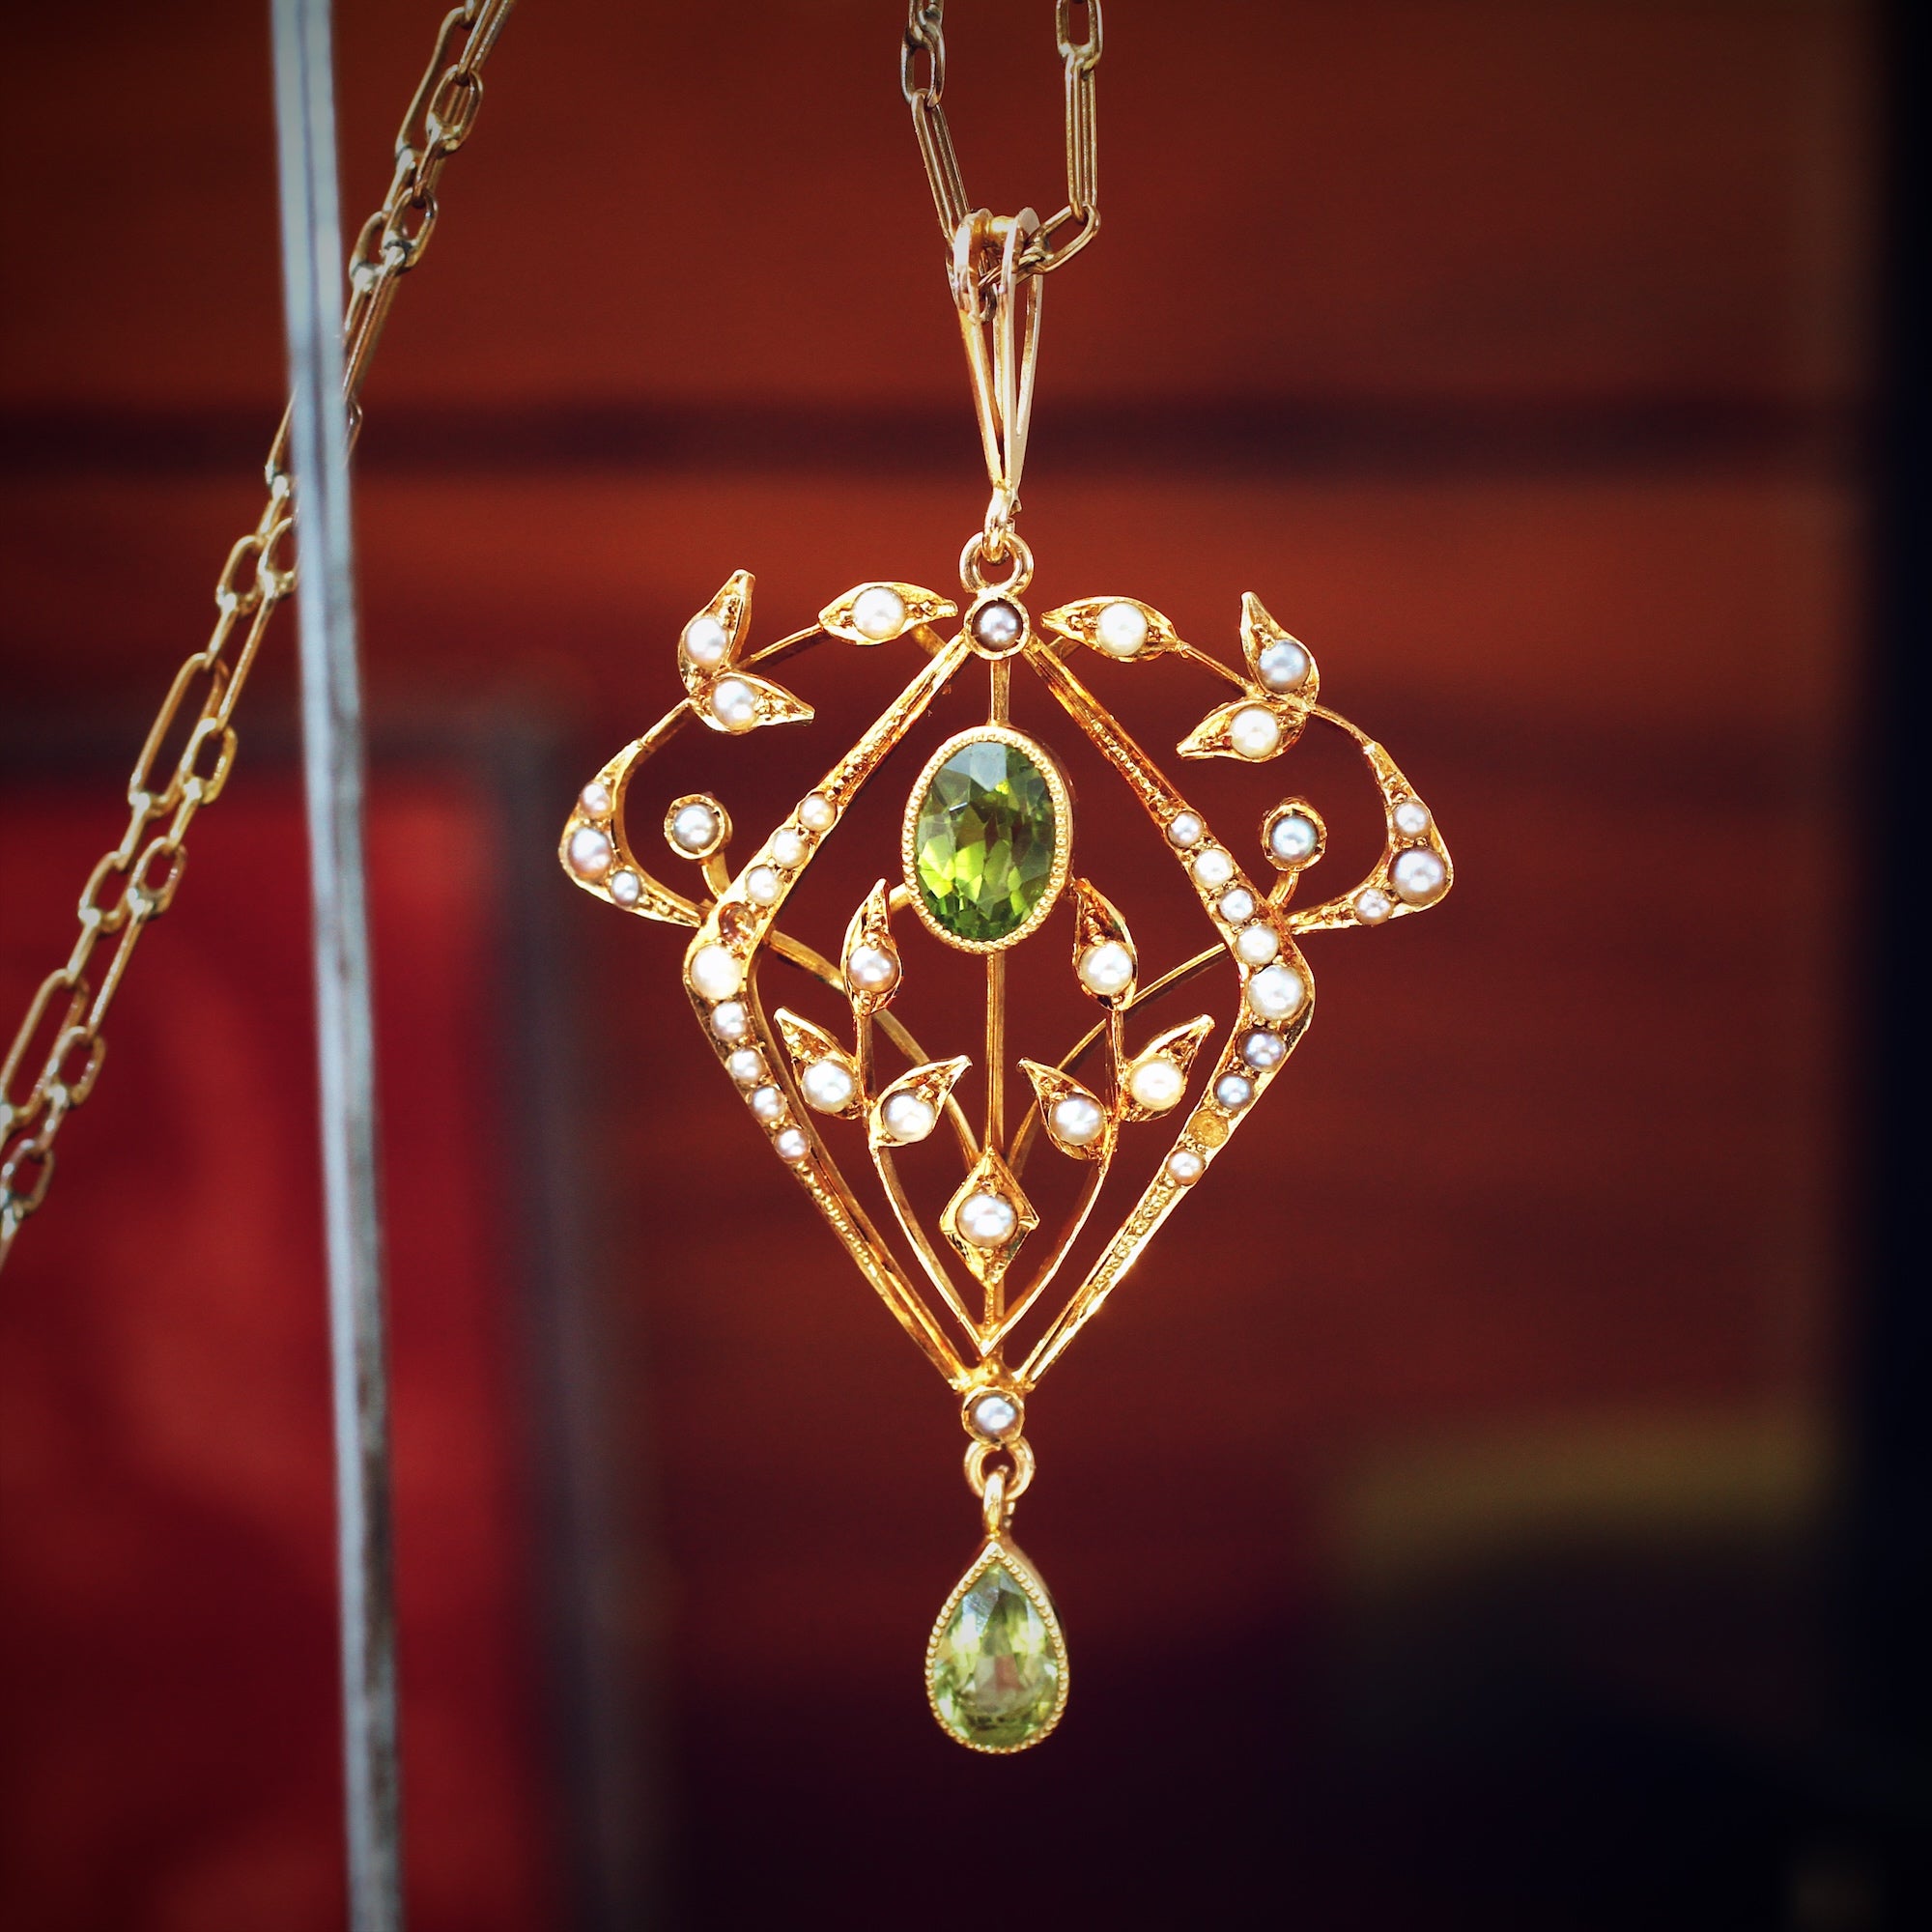 Antique Edwardian Peridot and Garnet Necklace in 9k Gold - Victoria Sterling